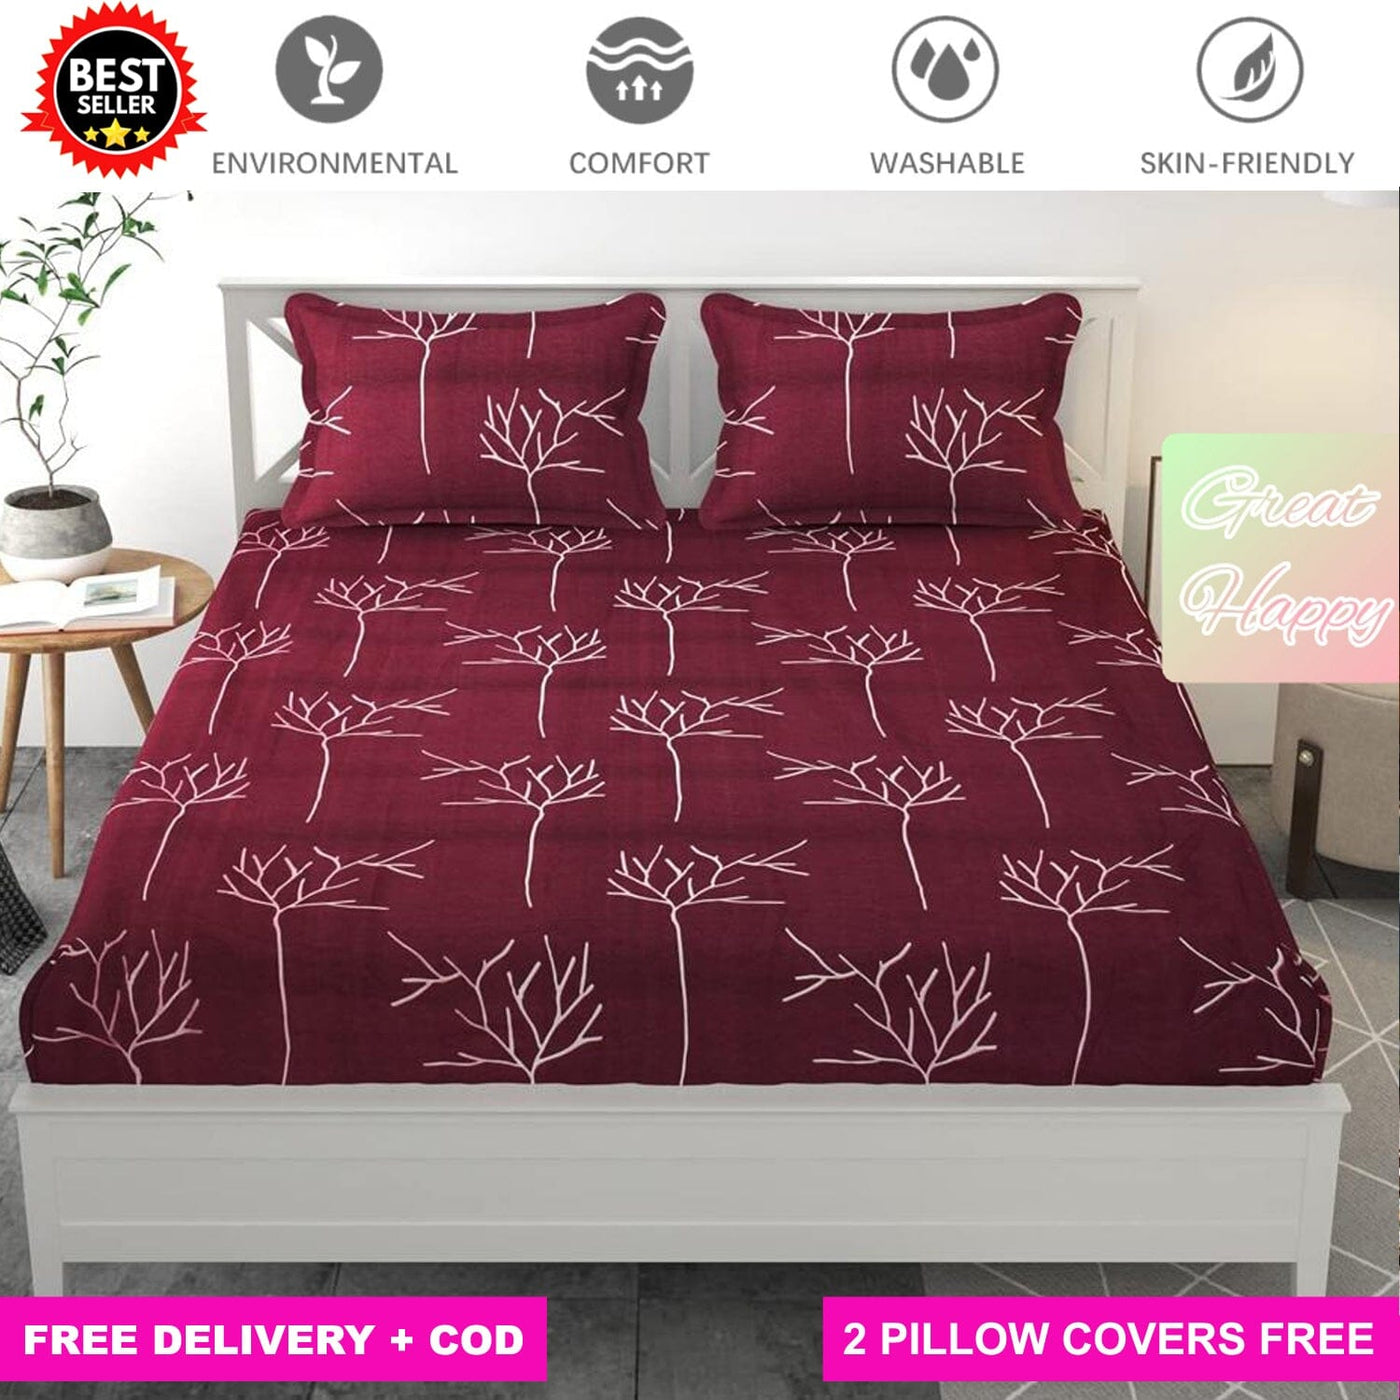 Maroon Tree Full Elastic Fitted Bedsheet with 2 Pillow Covers Bed Sheets Great Happy IN KING SIZE - ₹1299 